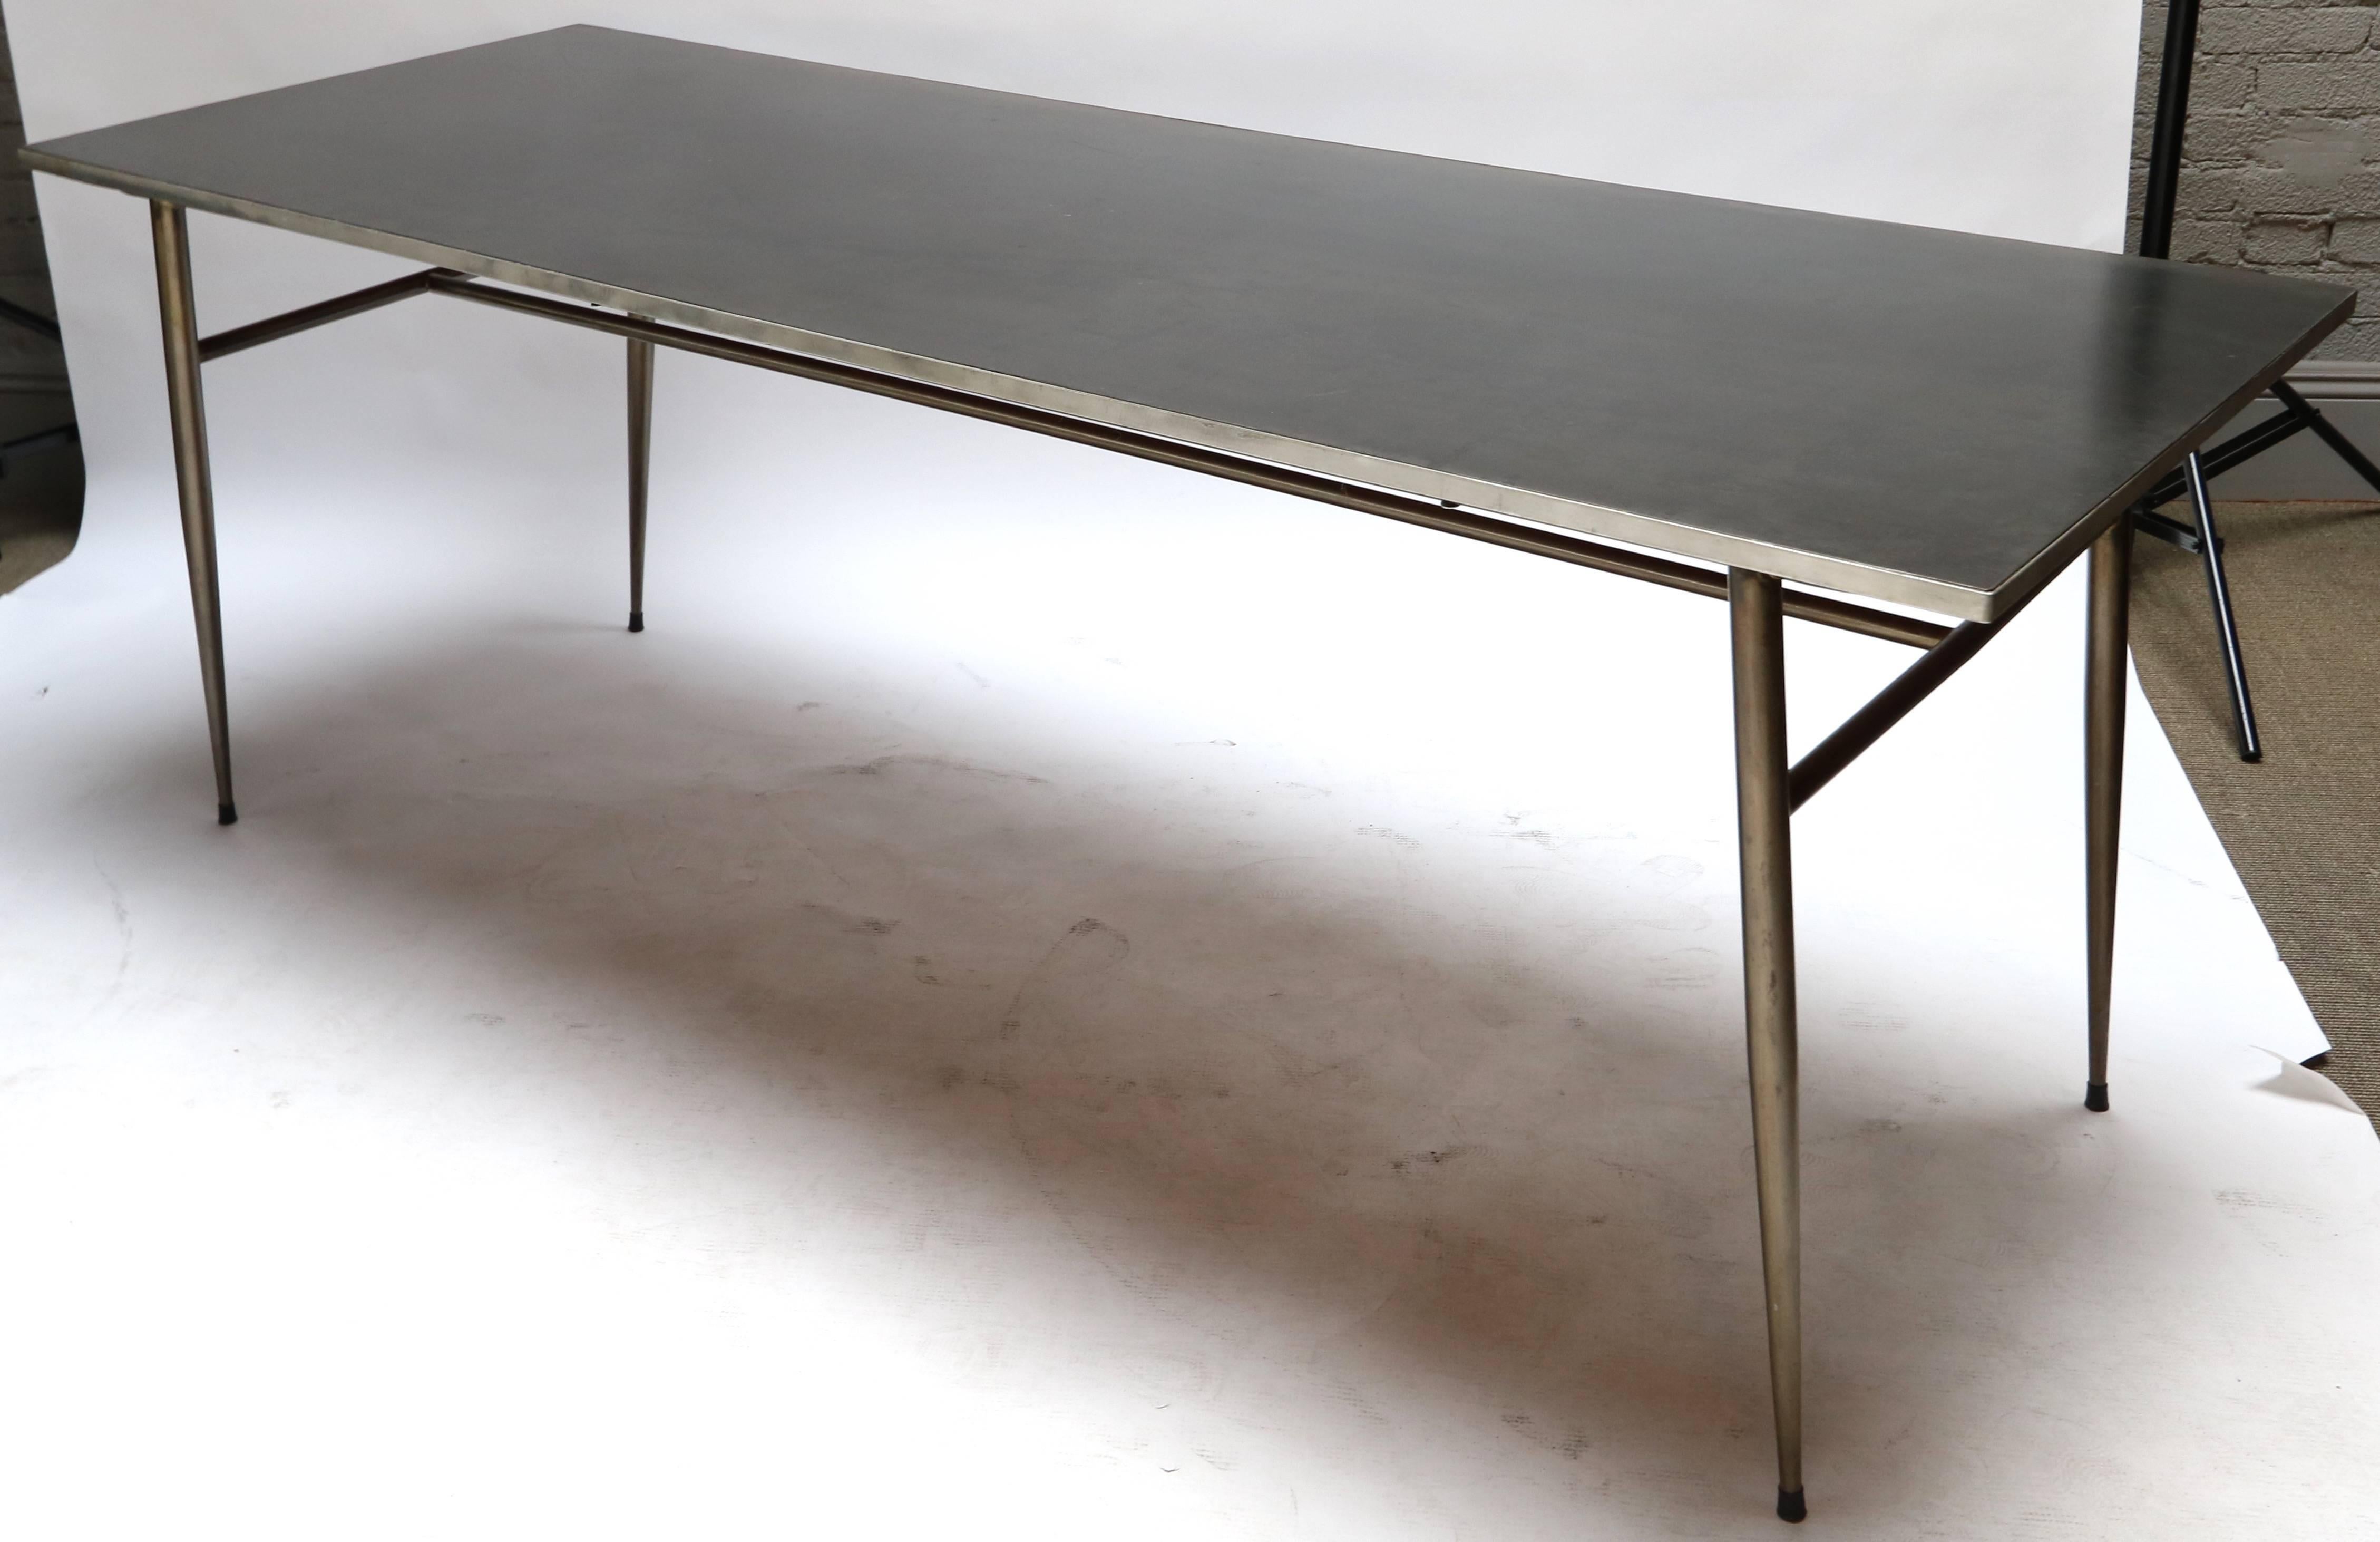 1950s steel Industrial dining table with black top.